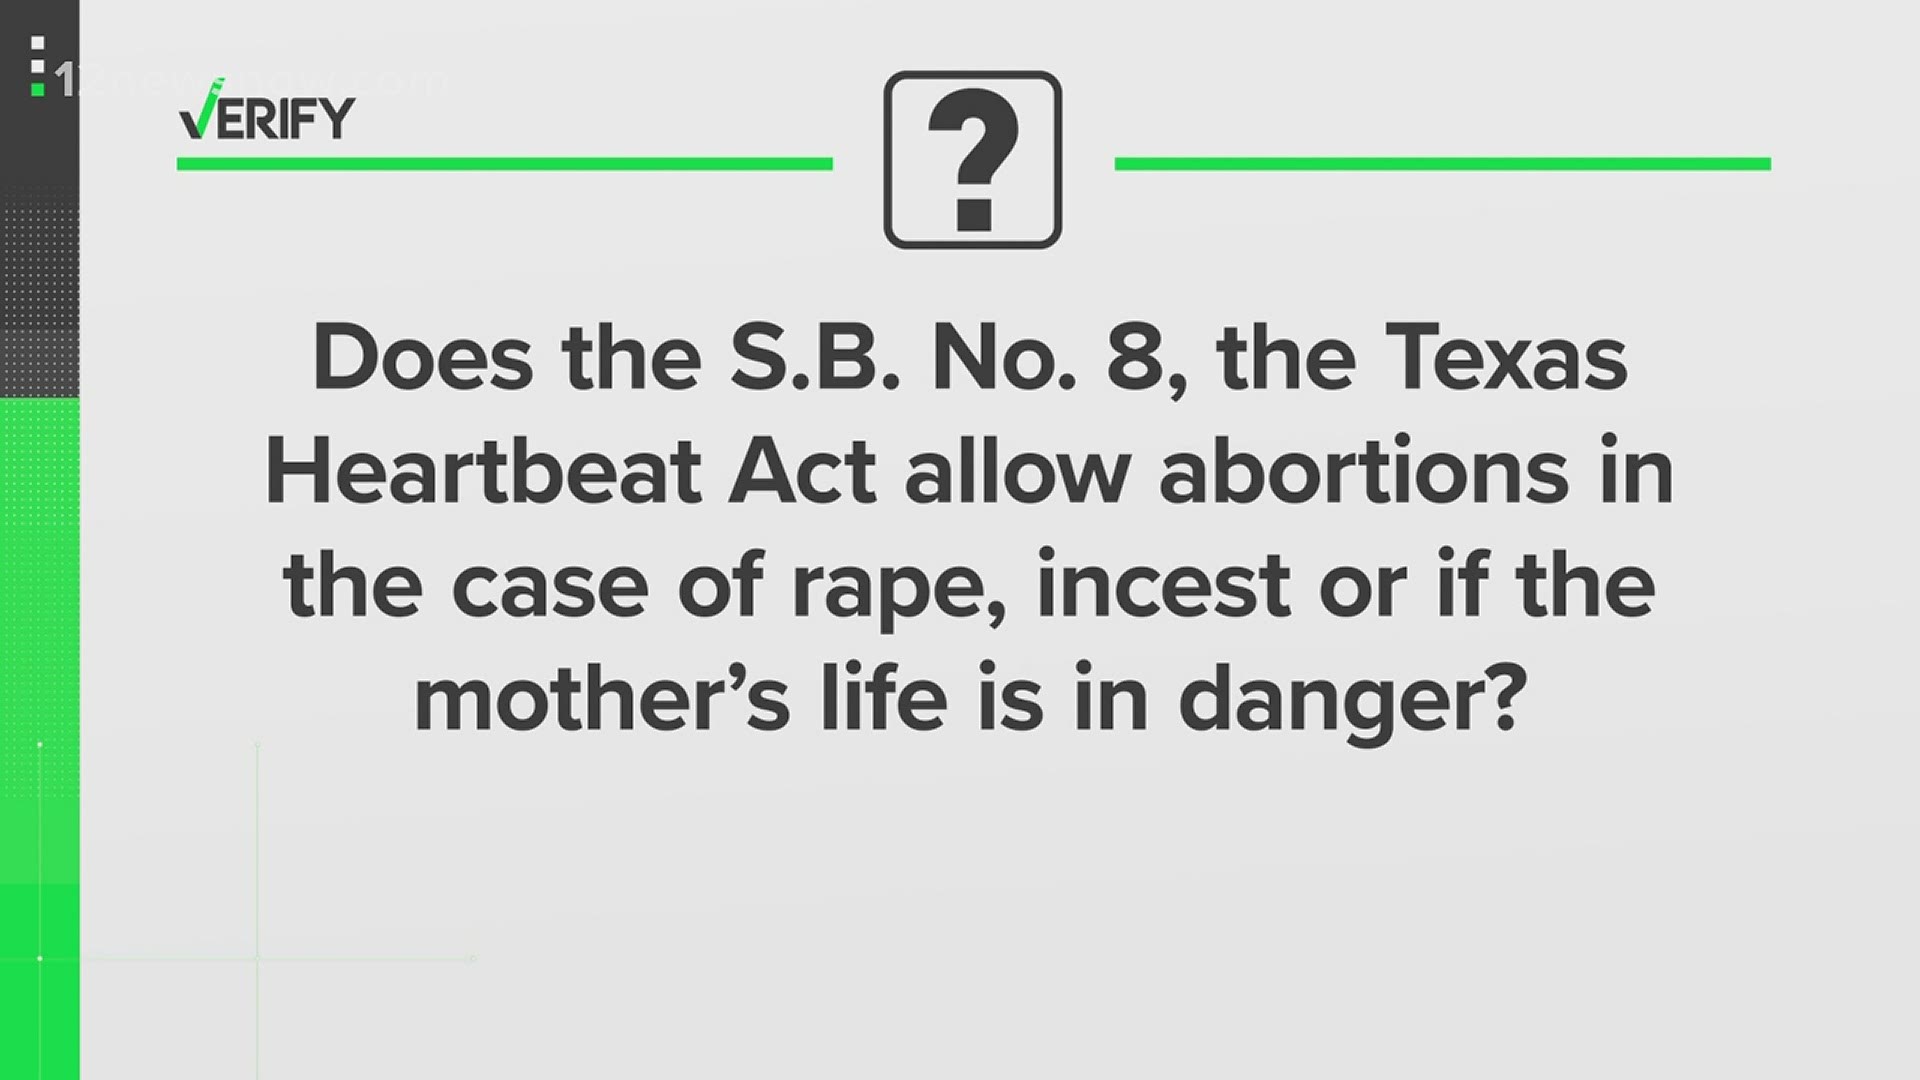 Some people have seen conflicting reports about the new Texas law.